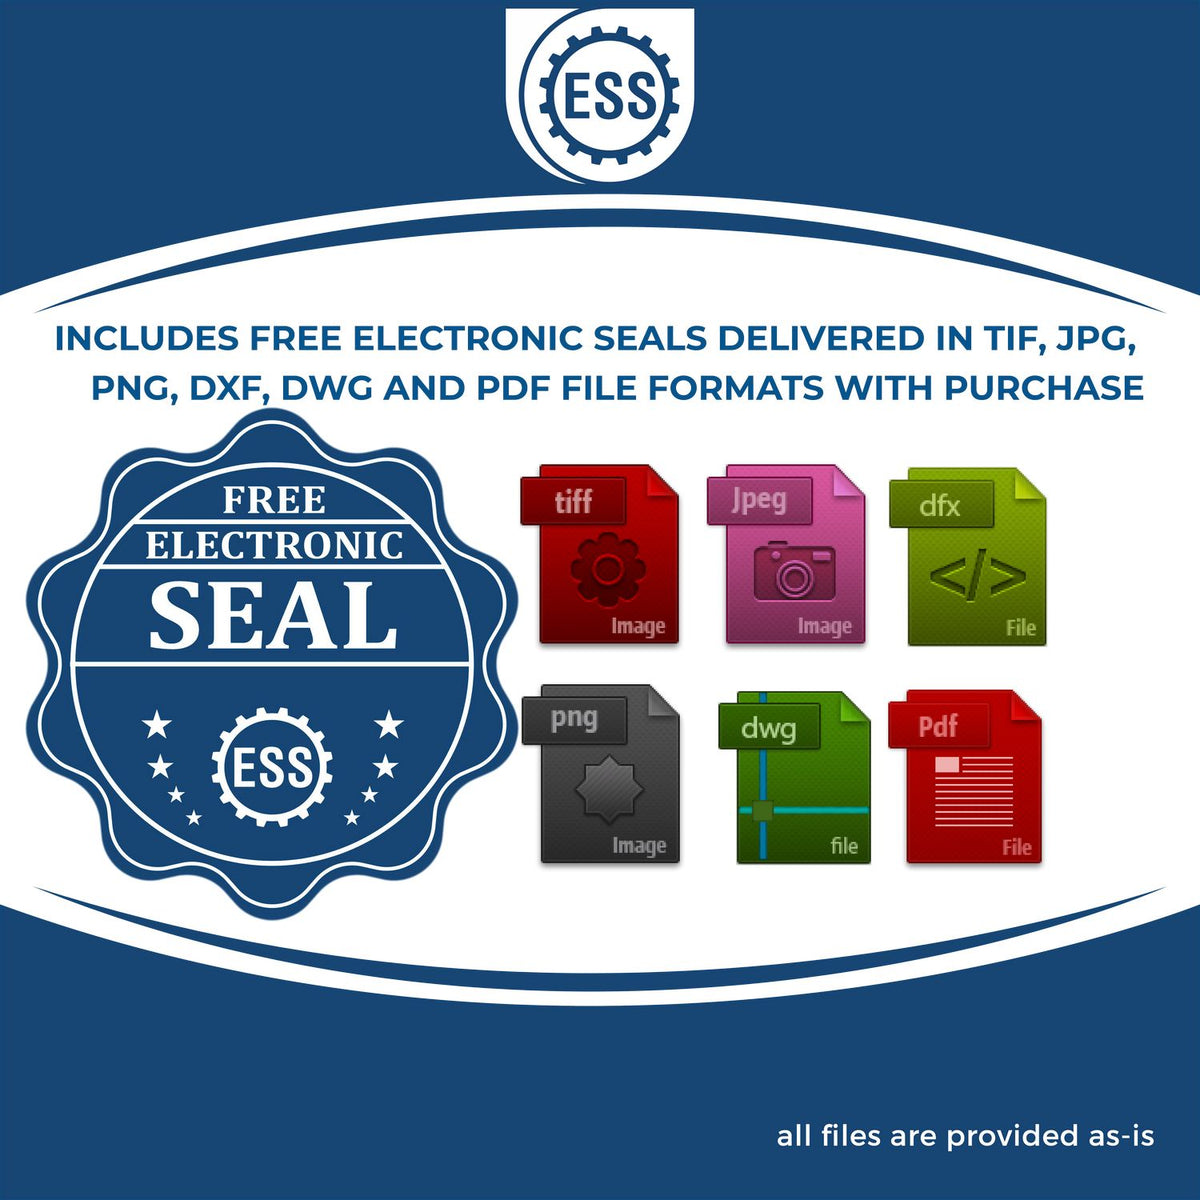 An infographic for the free electronic seal for the Heavy Duty Cast Iron Missouri Architect Embosser illustrating the different file type icons such as DXF, DWG, TIF, JPG and PNG.